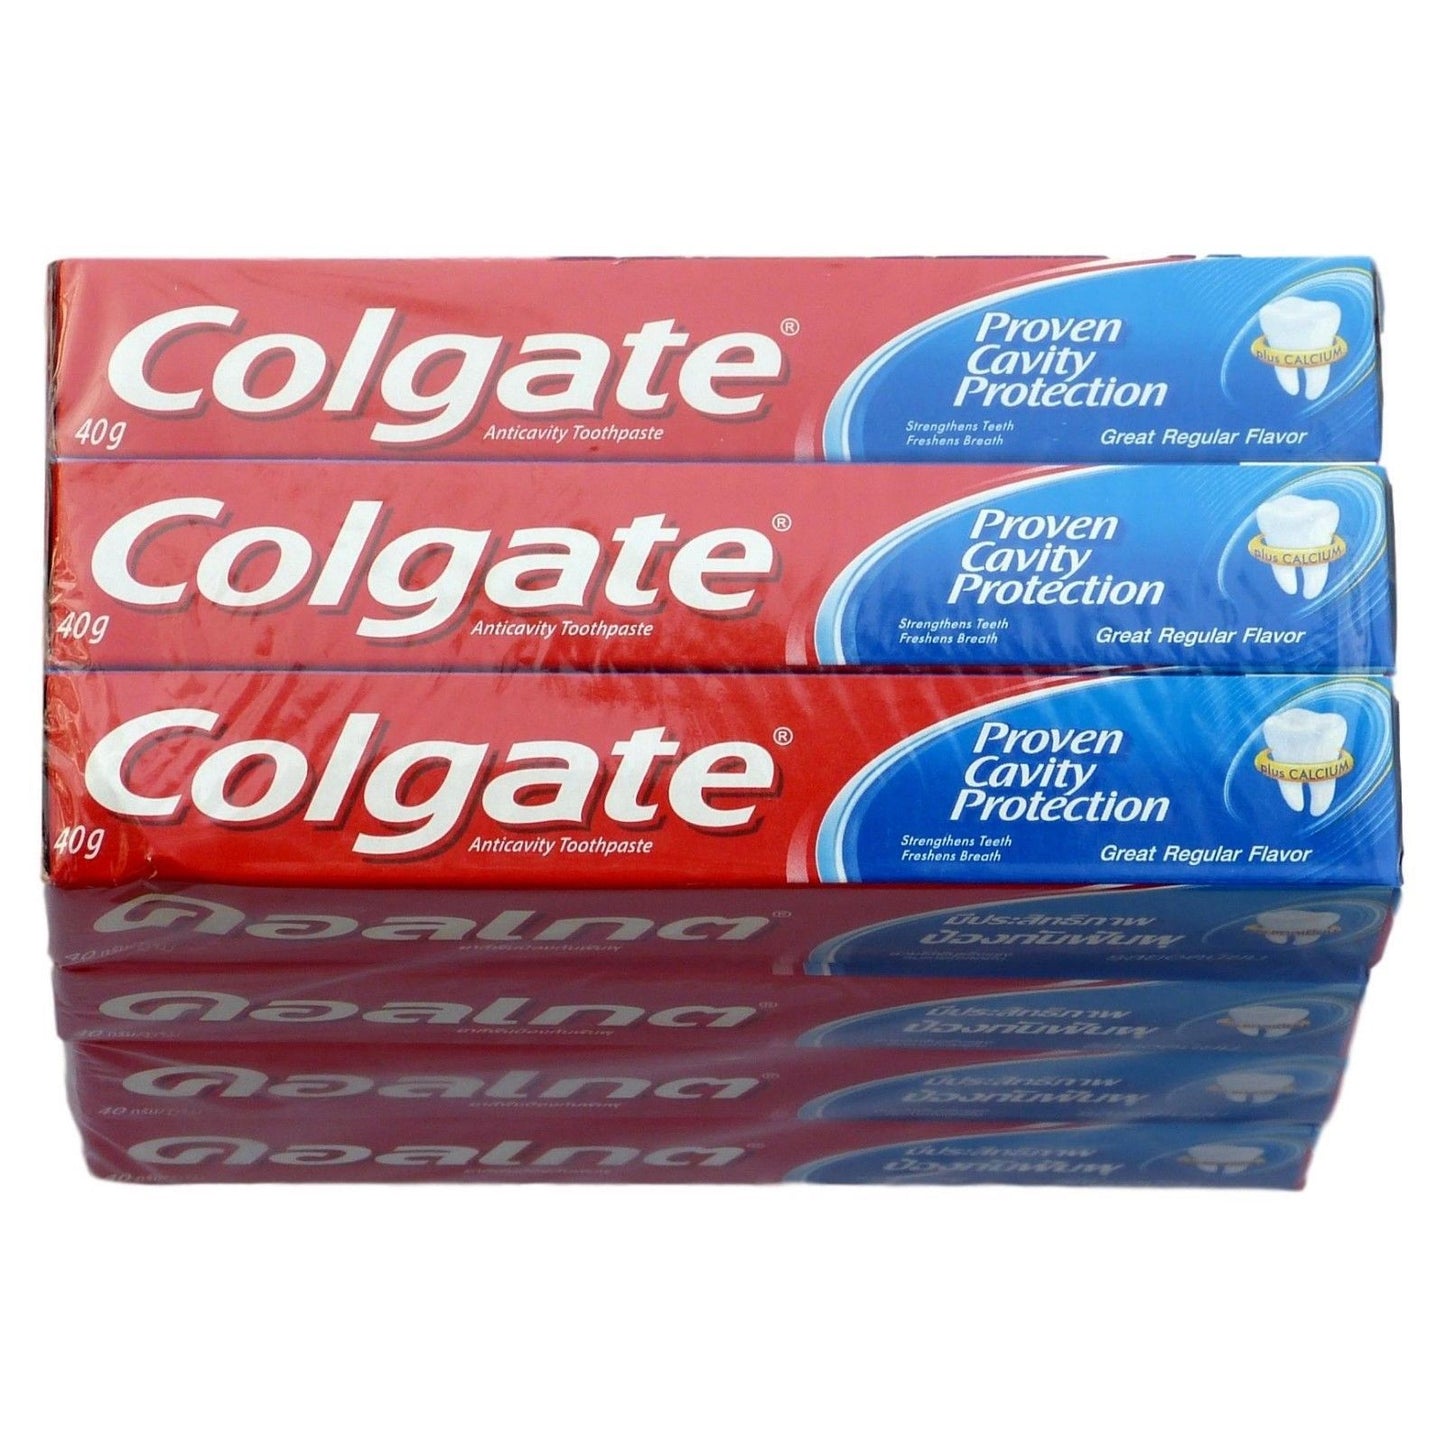 Colgate Great Regular Flavor Toothpaste 40 grams Pack of 12 Travel Size Tubes - Asian Beauty Supply